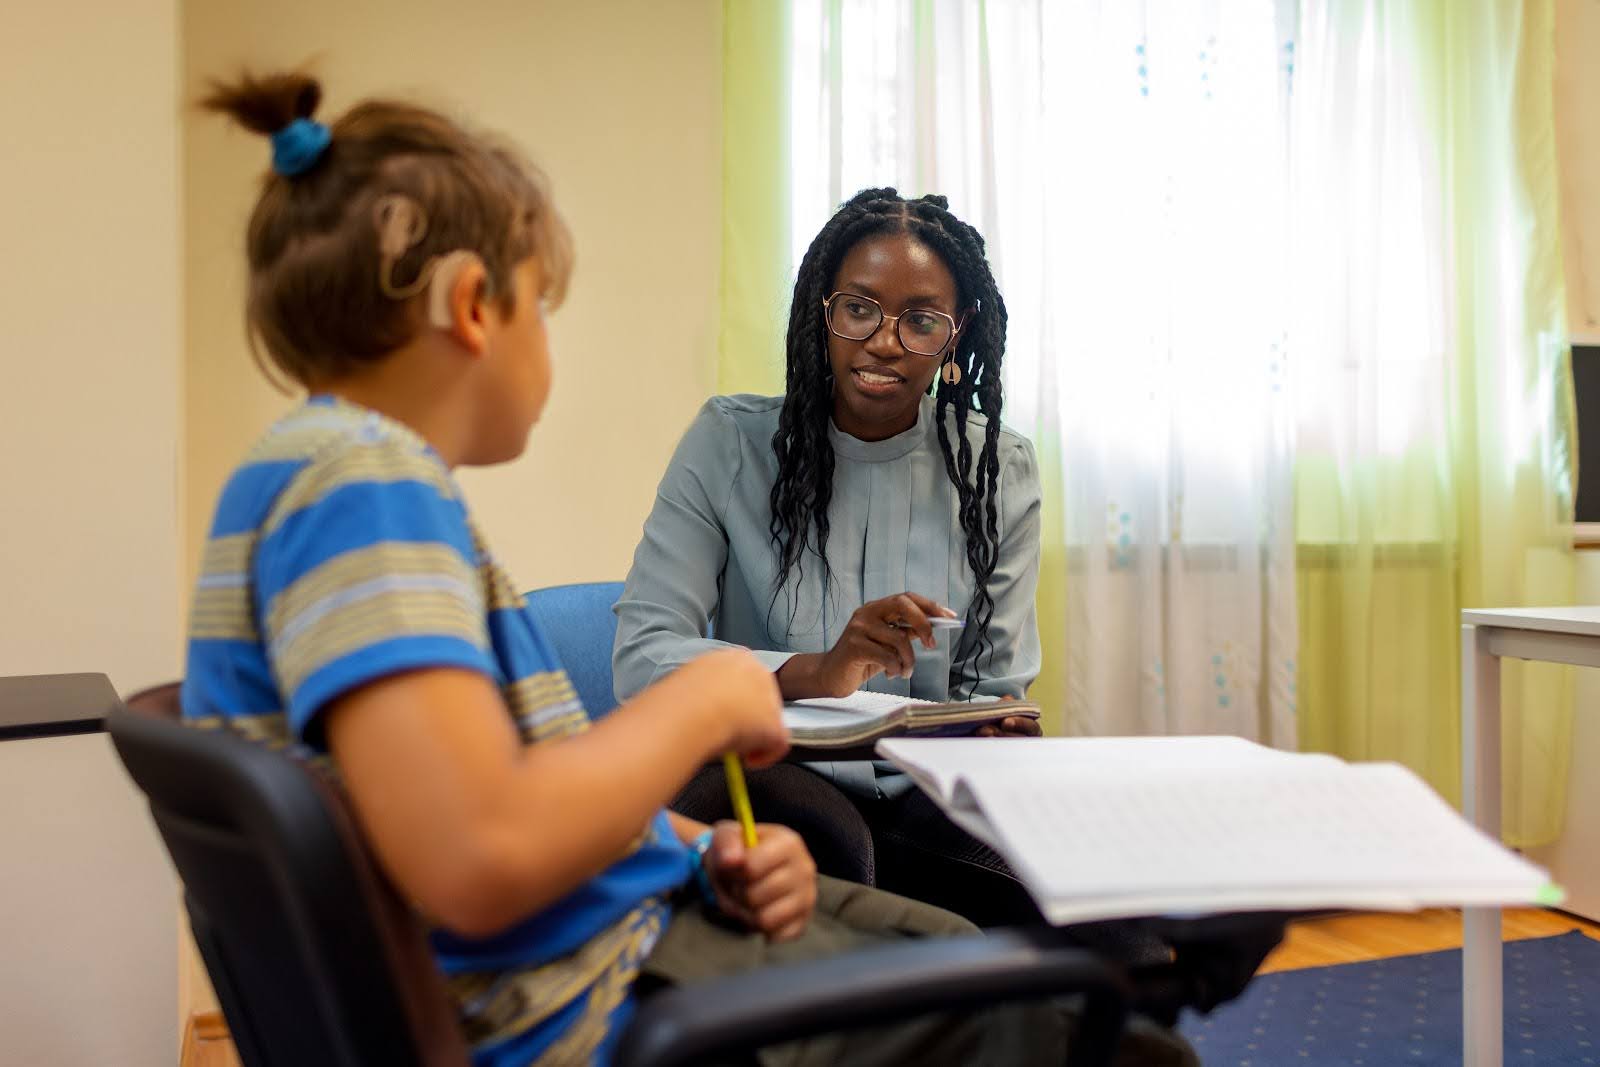 A teacher works one-on-one with a young student wearing a hearing aid.